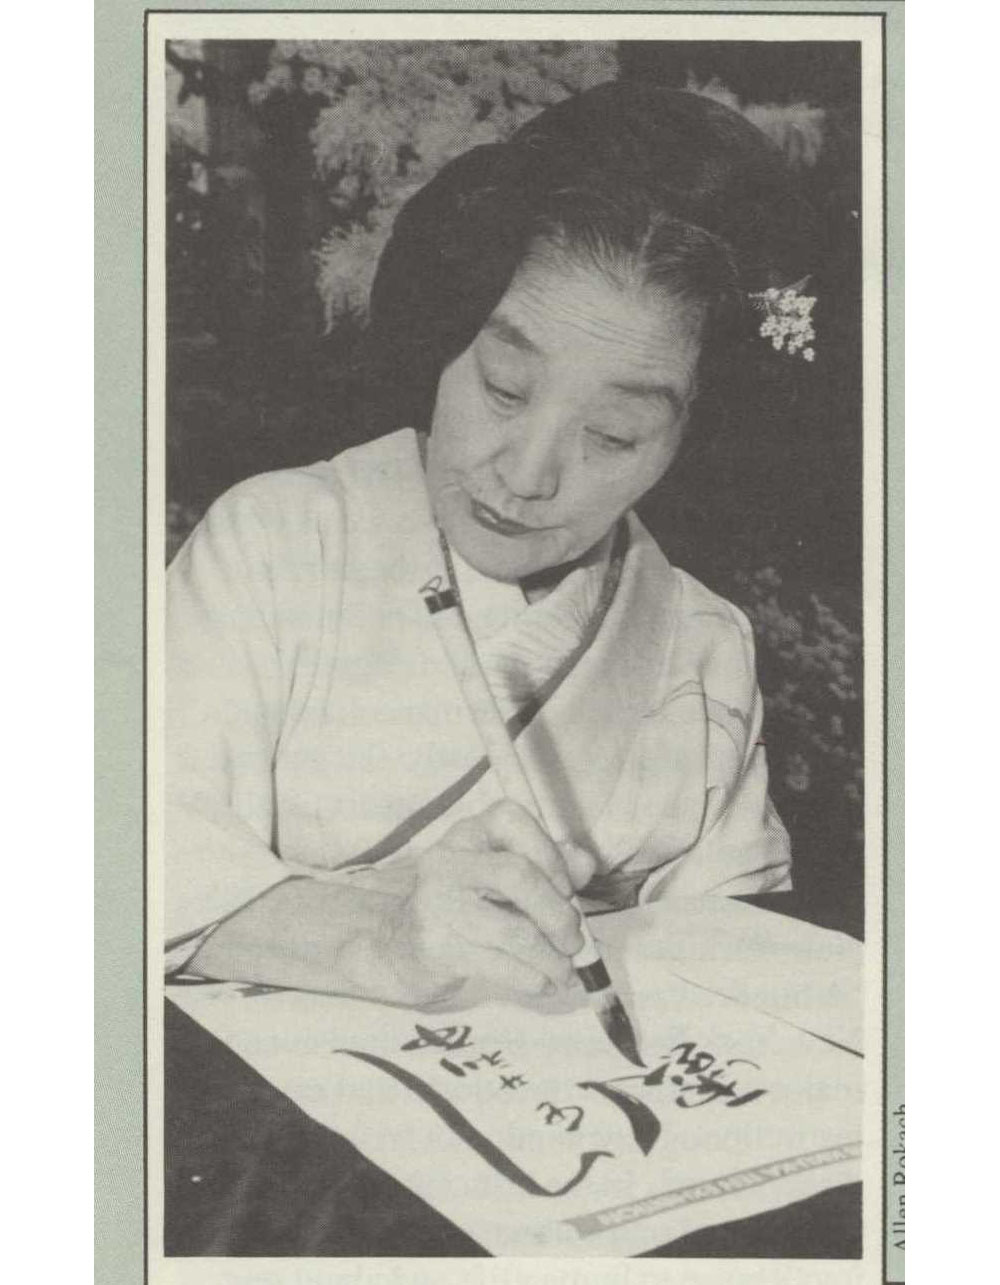 Kiharu Nakamura, a popular Geisha, wears her hair in a bun with flowers. She paints visitors' names in Japanese characters as sourvenirs for guests at Kiku.